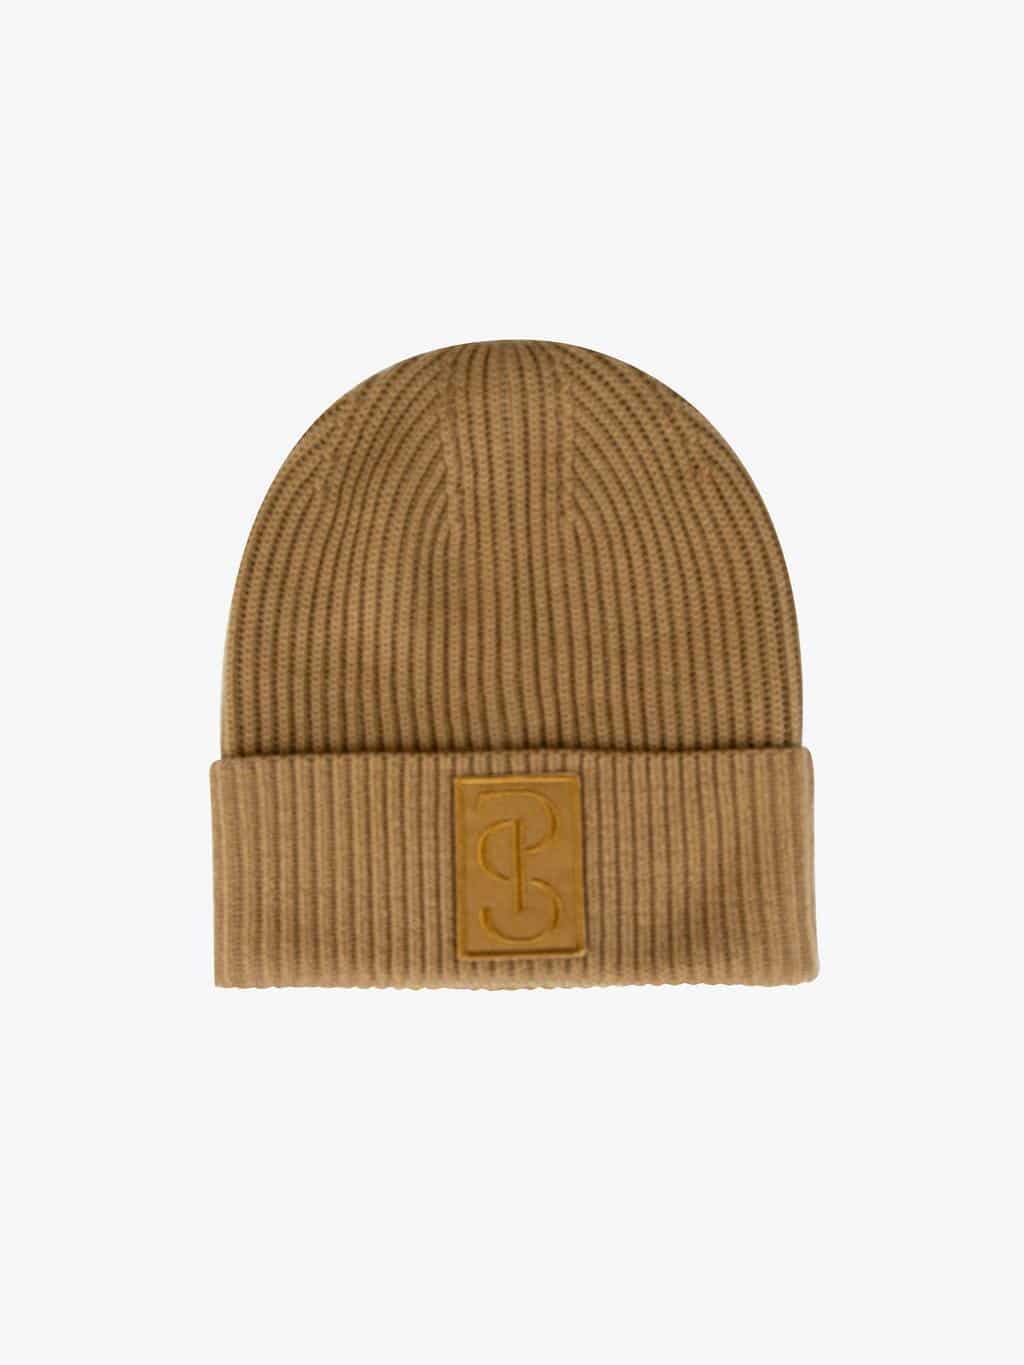 PSOS 'Sally' knitted beanie - Camel Rider Accessories 